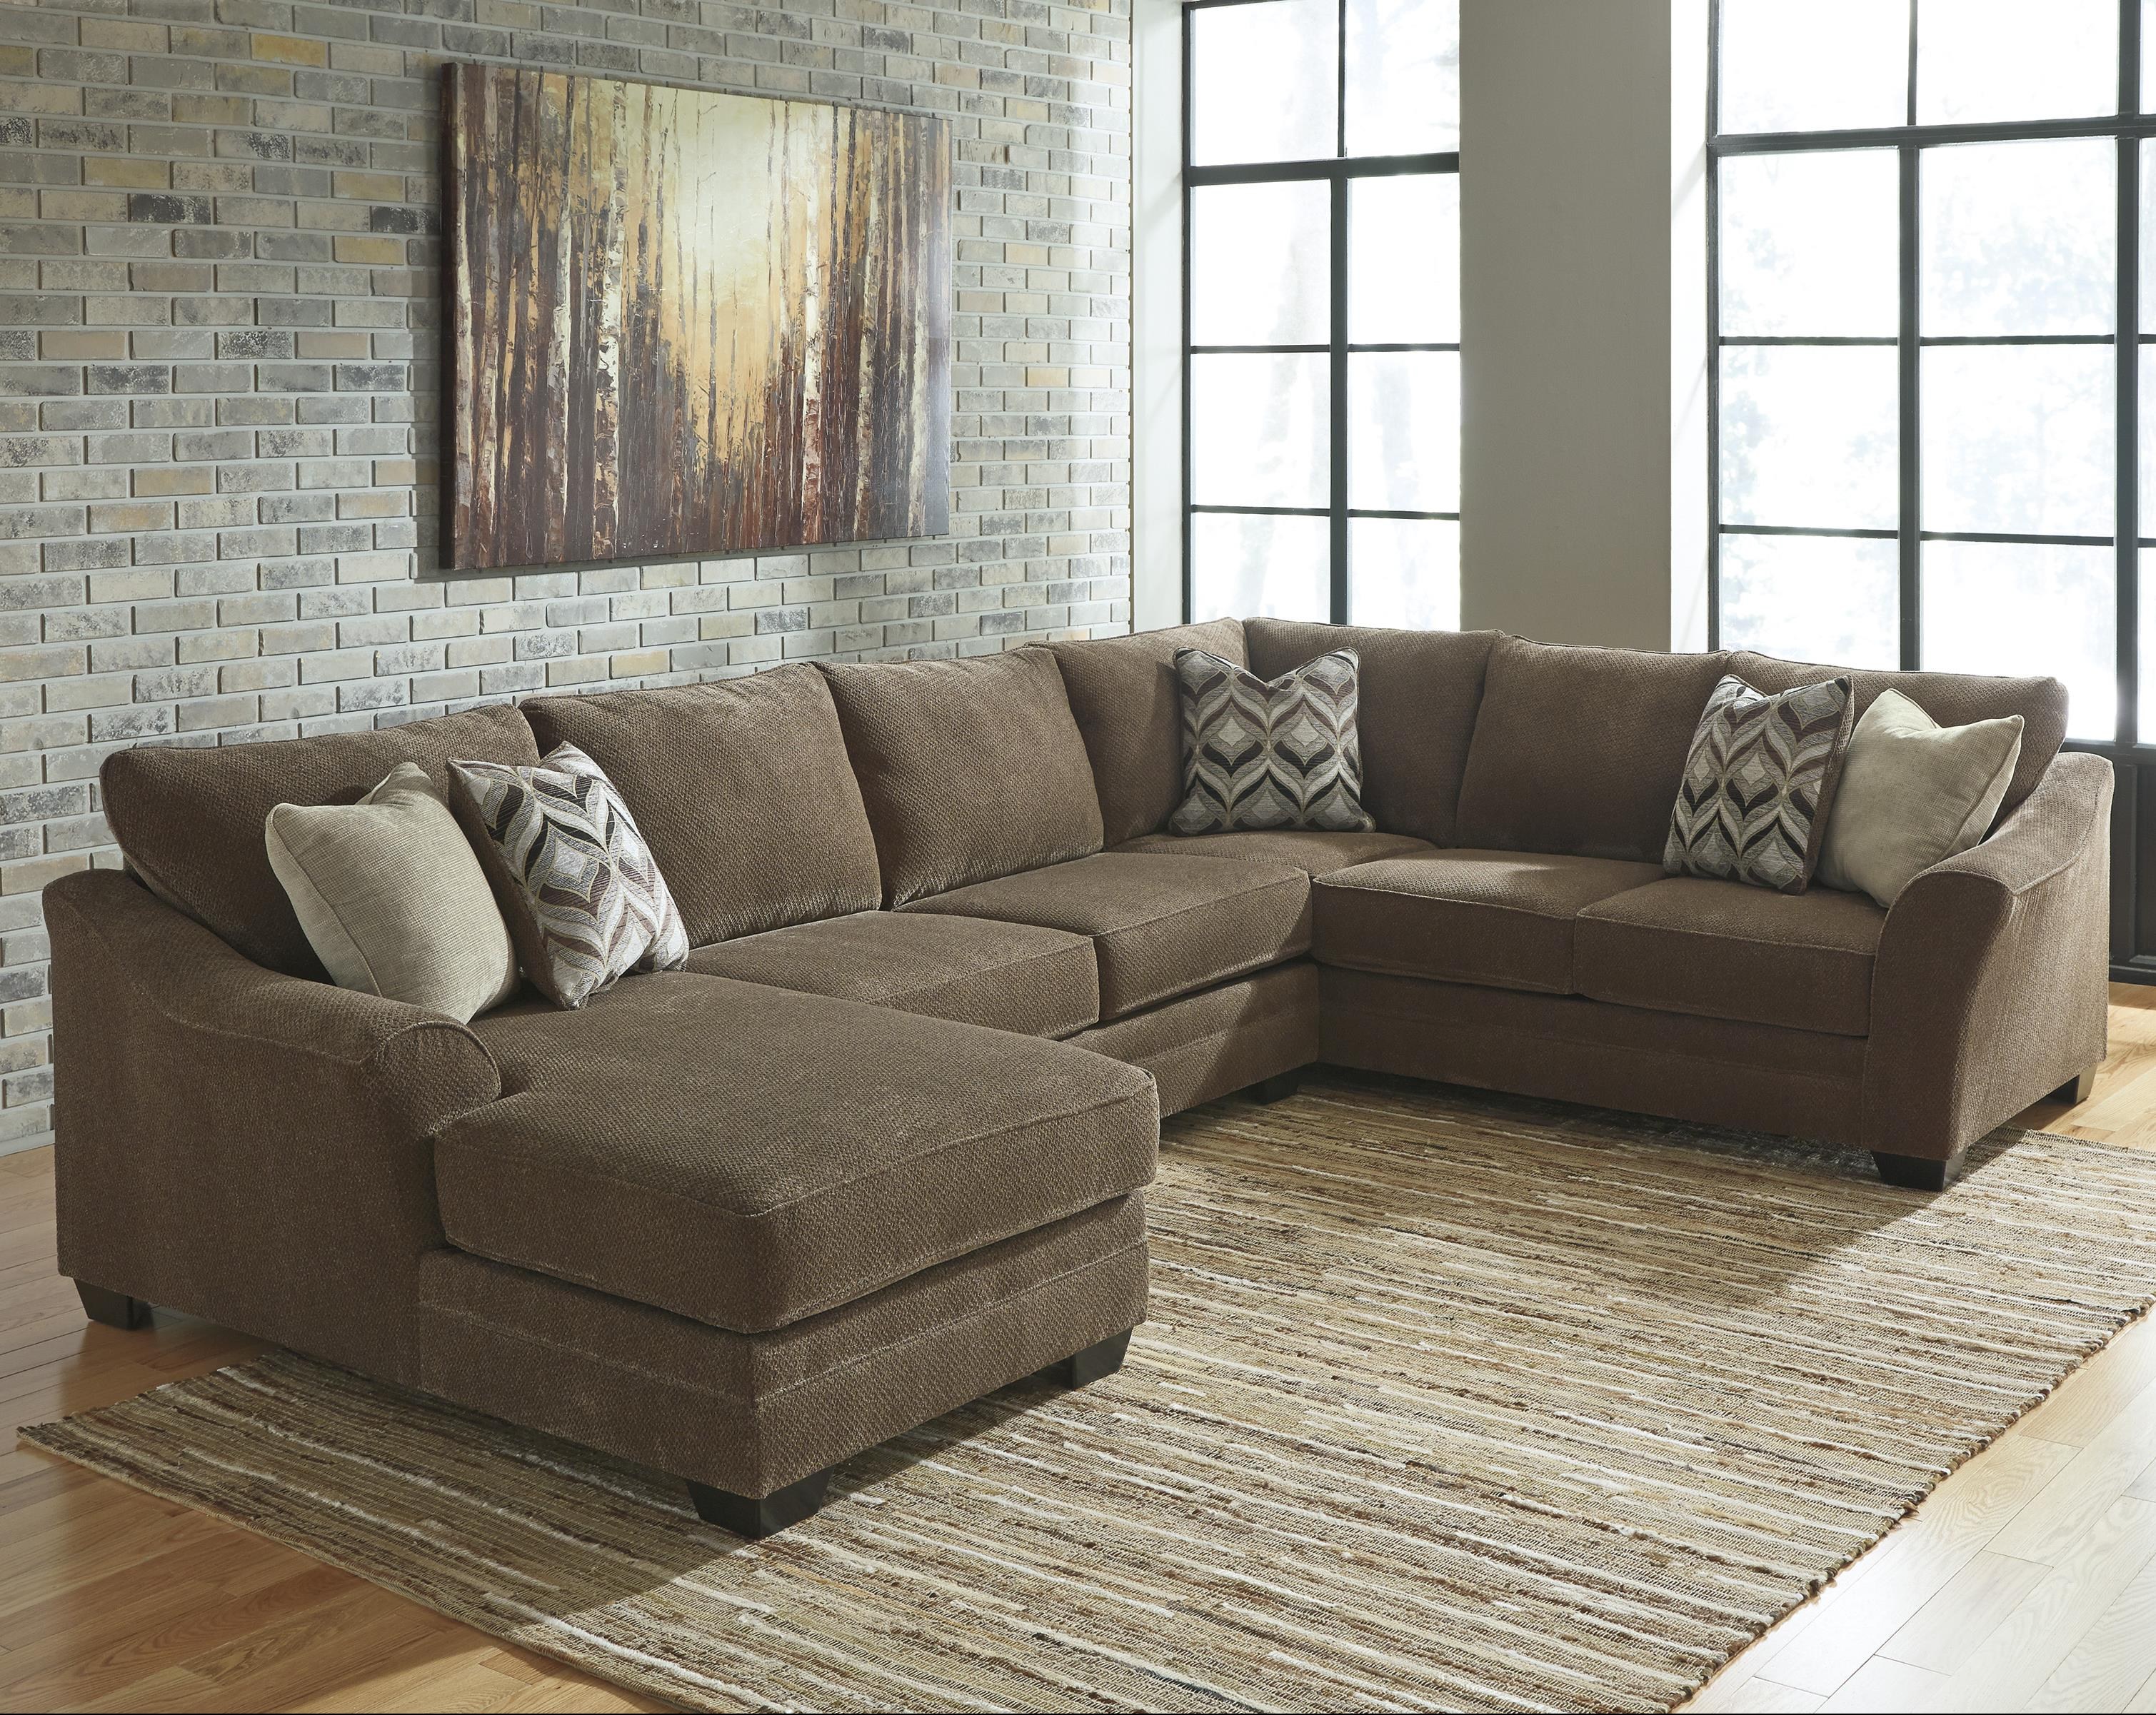 Benchcraft Justyna Contemporary 3-Piece Sectional with Left Chaise